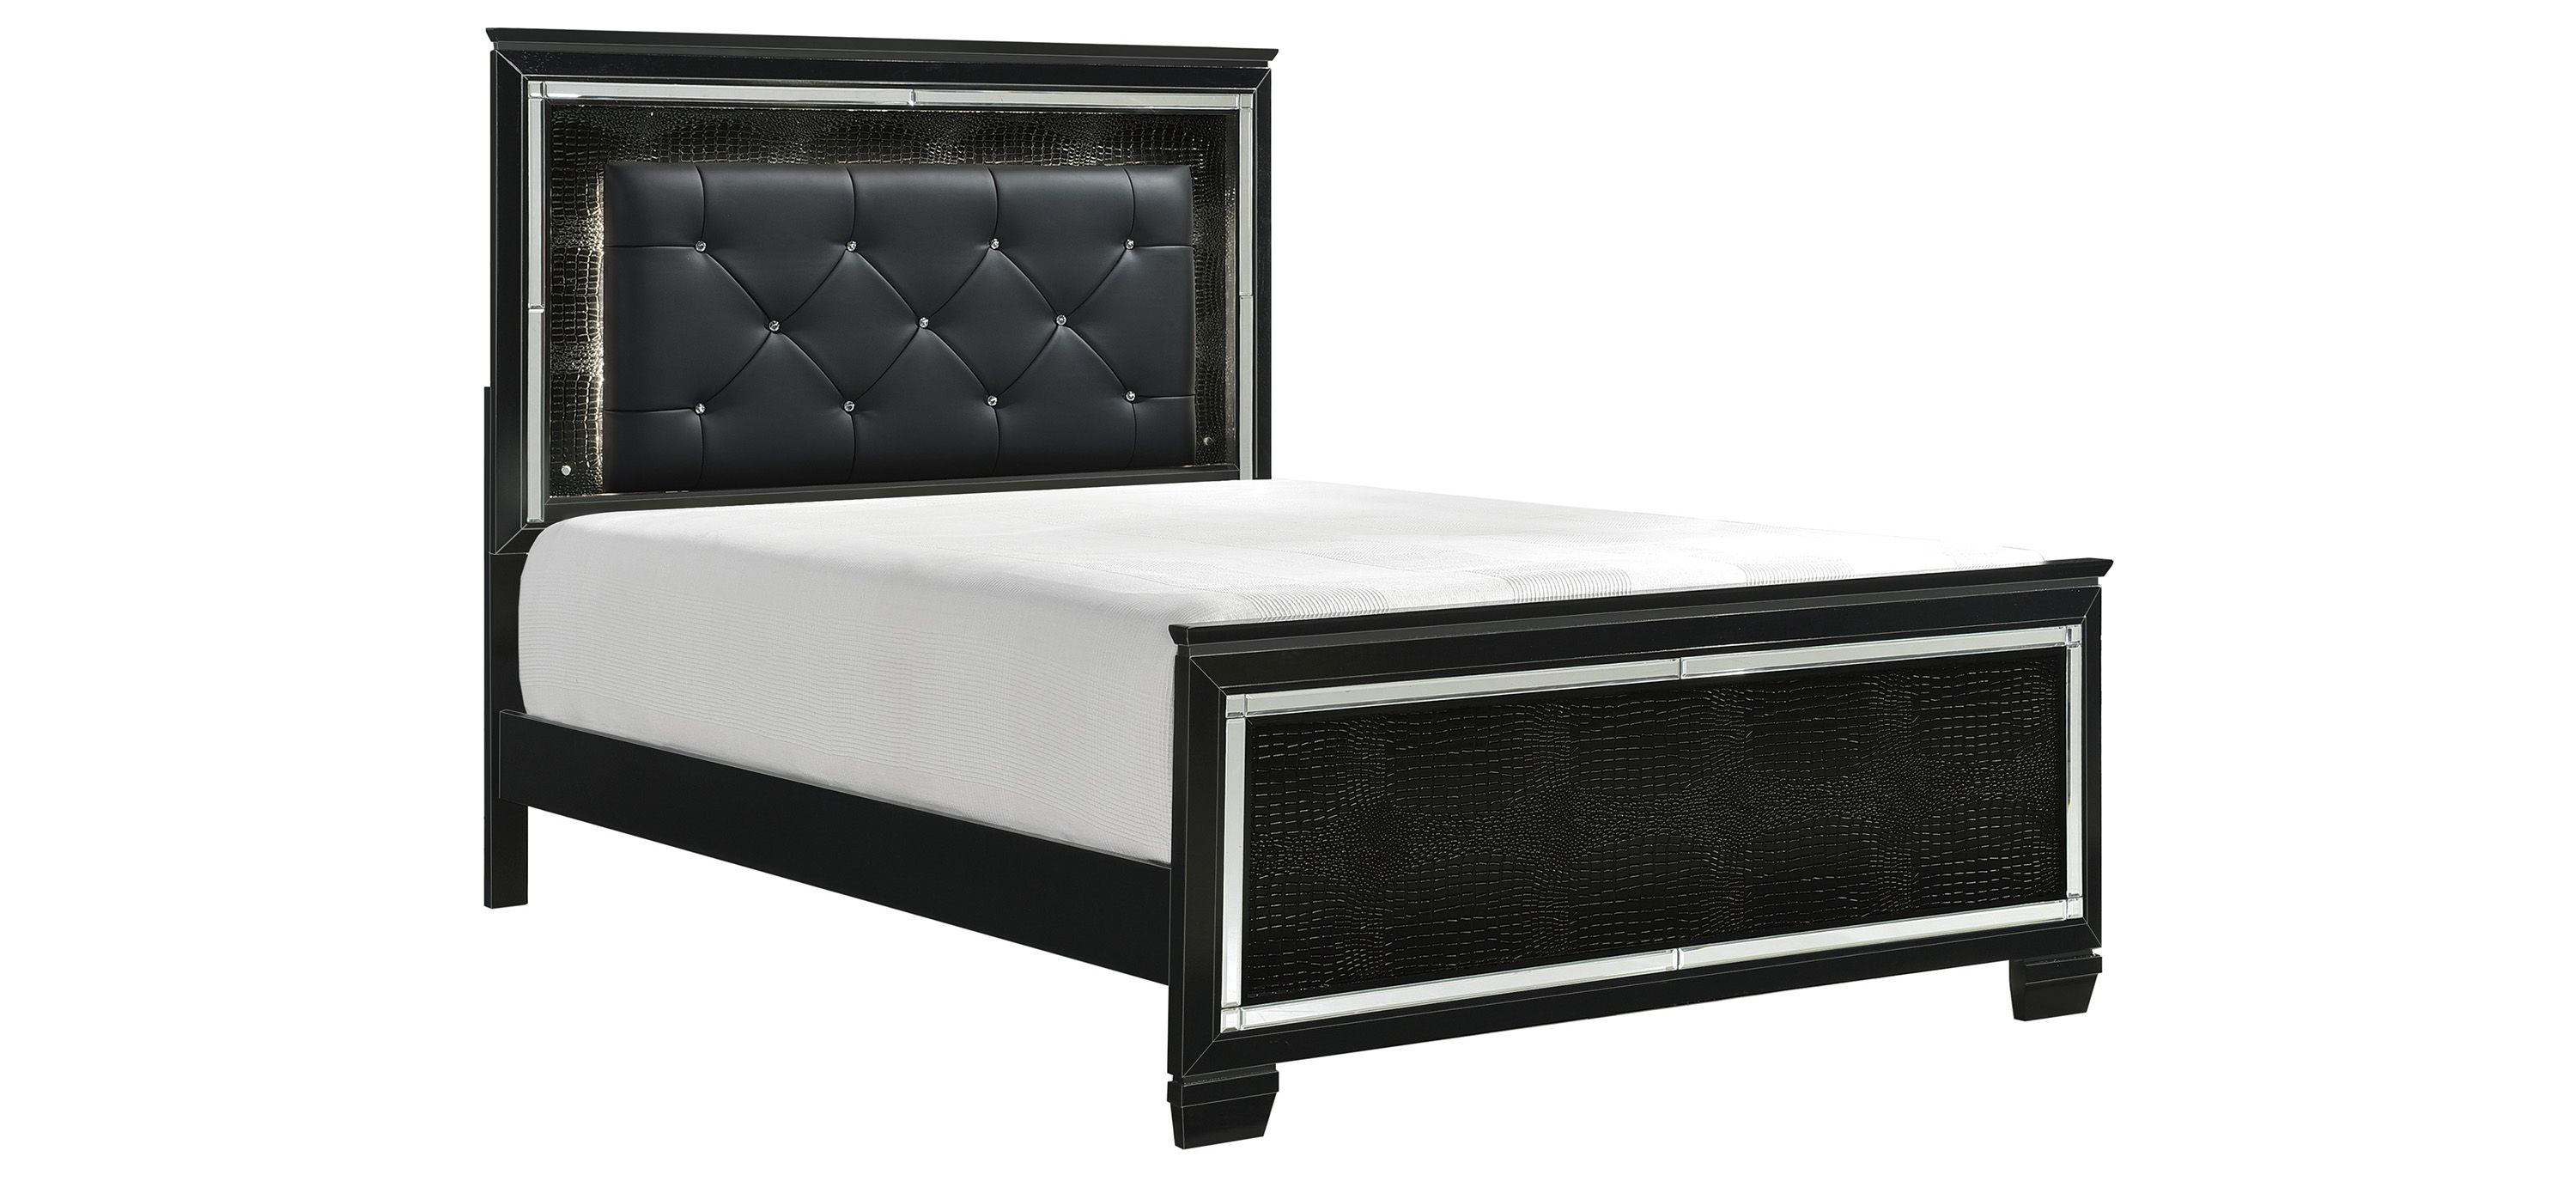 Brambley Bed with LED Lighting